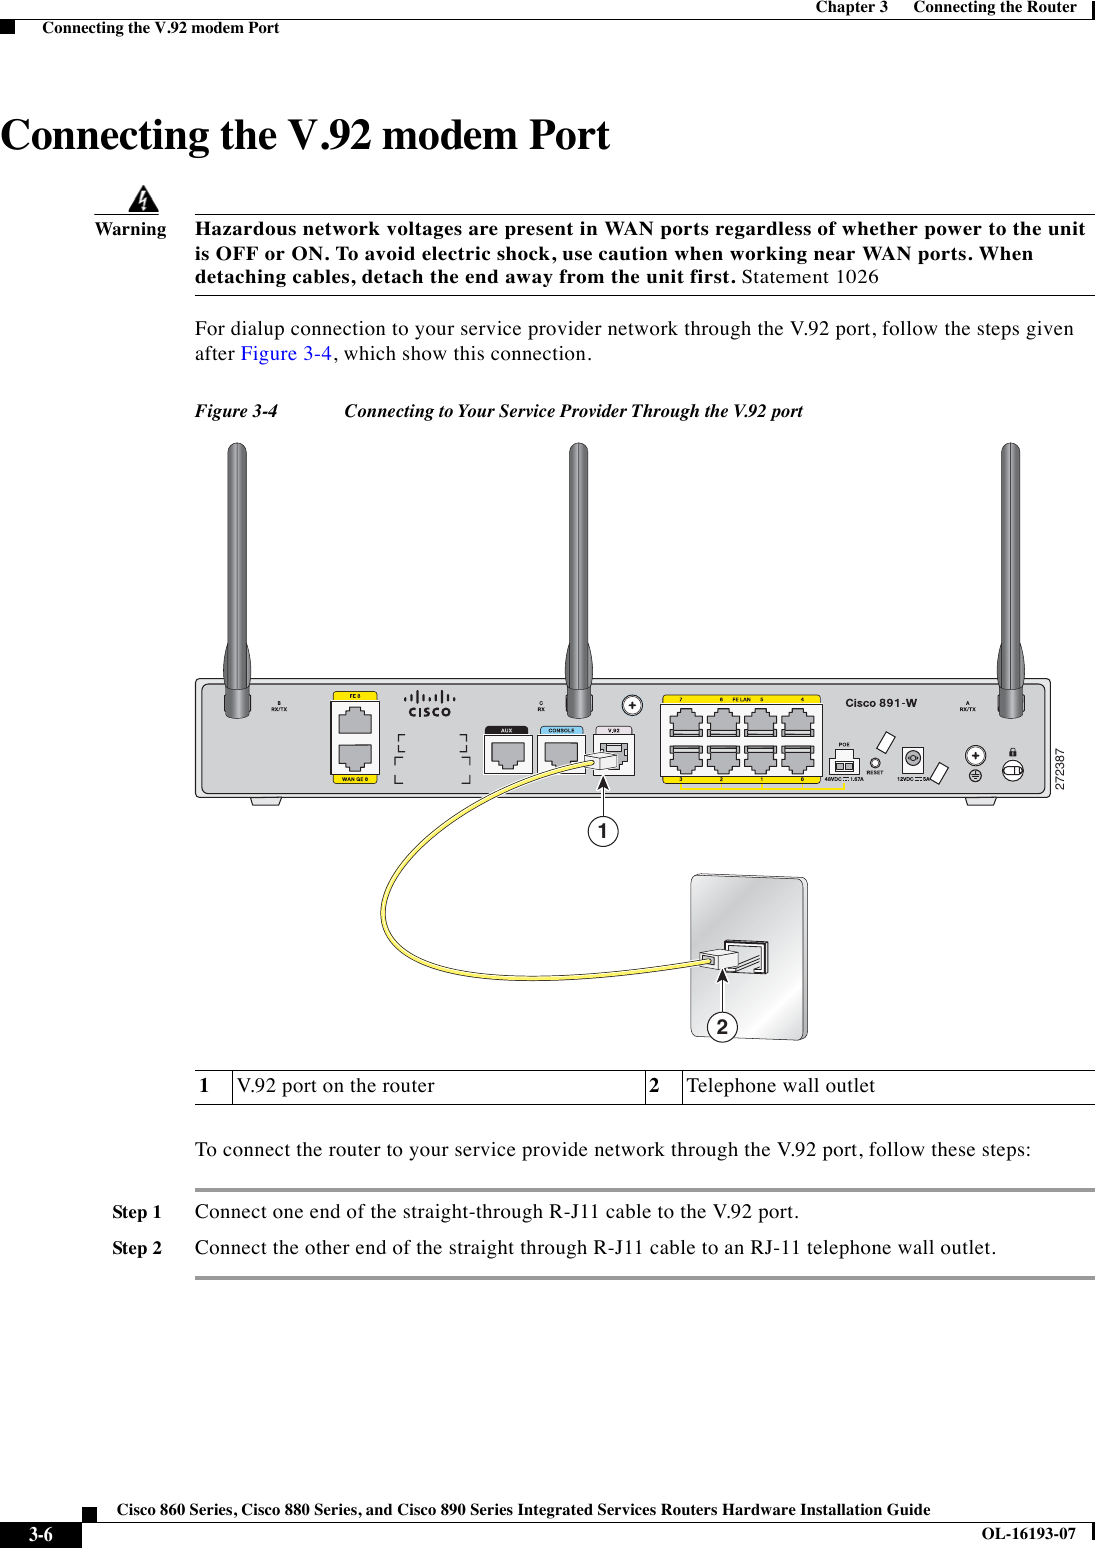  3-6Cisco 860 Series, Cisco 880 Series, and Cisco 890 Series Integrated Services Routers Hardware Installation GuideOL-16193-07Chapter 3      Connecting the Router  Connecting the V.92 modem PortConnecting the V.92 modem PortWarningHazardous network voltages are present in WAN ports regardless of whether power to the unit is OFF or ON. To avoid electric shock, use caution when working near WAN ports. When detaching cables, detach the end away from the unit first. Statement 1026For dialup connection to your service provider network through the V.92 port, follow the steps given after Figure 3-4, which show this connection.Figure 3-4 Connecting to Your Service Provider Through the V.92 portTo connect the router to your service provide network through the V.92 port, follow these steps:Step 1Connect one end of the straight-through R-J11 cable to the V.92 port. Step 2Connect the other end of the straight through R-J11 cable to an RJ-11 telephone wall outlet. 1V.92 port on the router 2Telephone wall outlet27238712